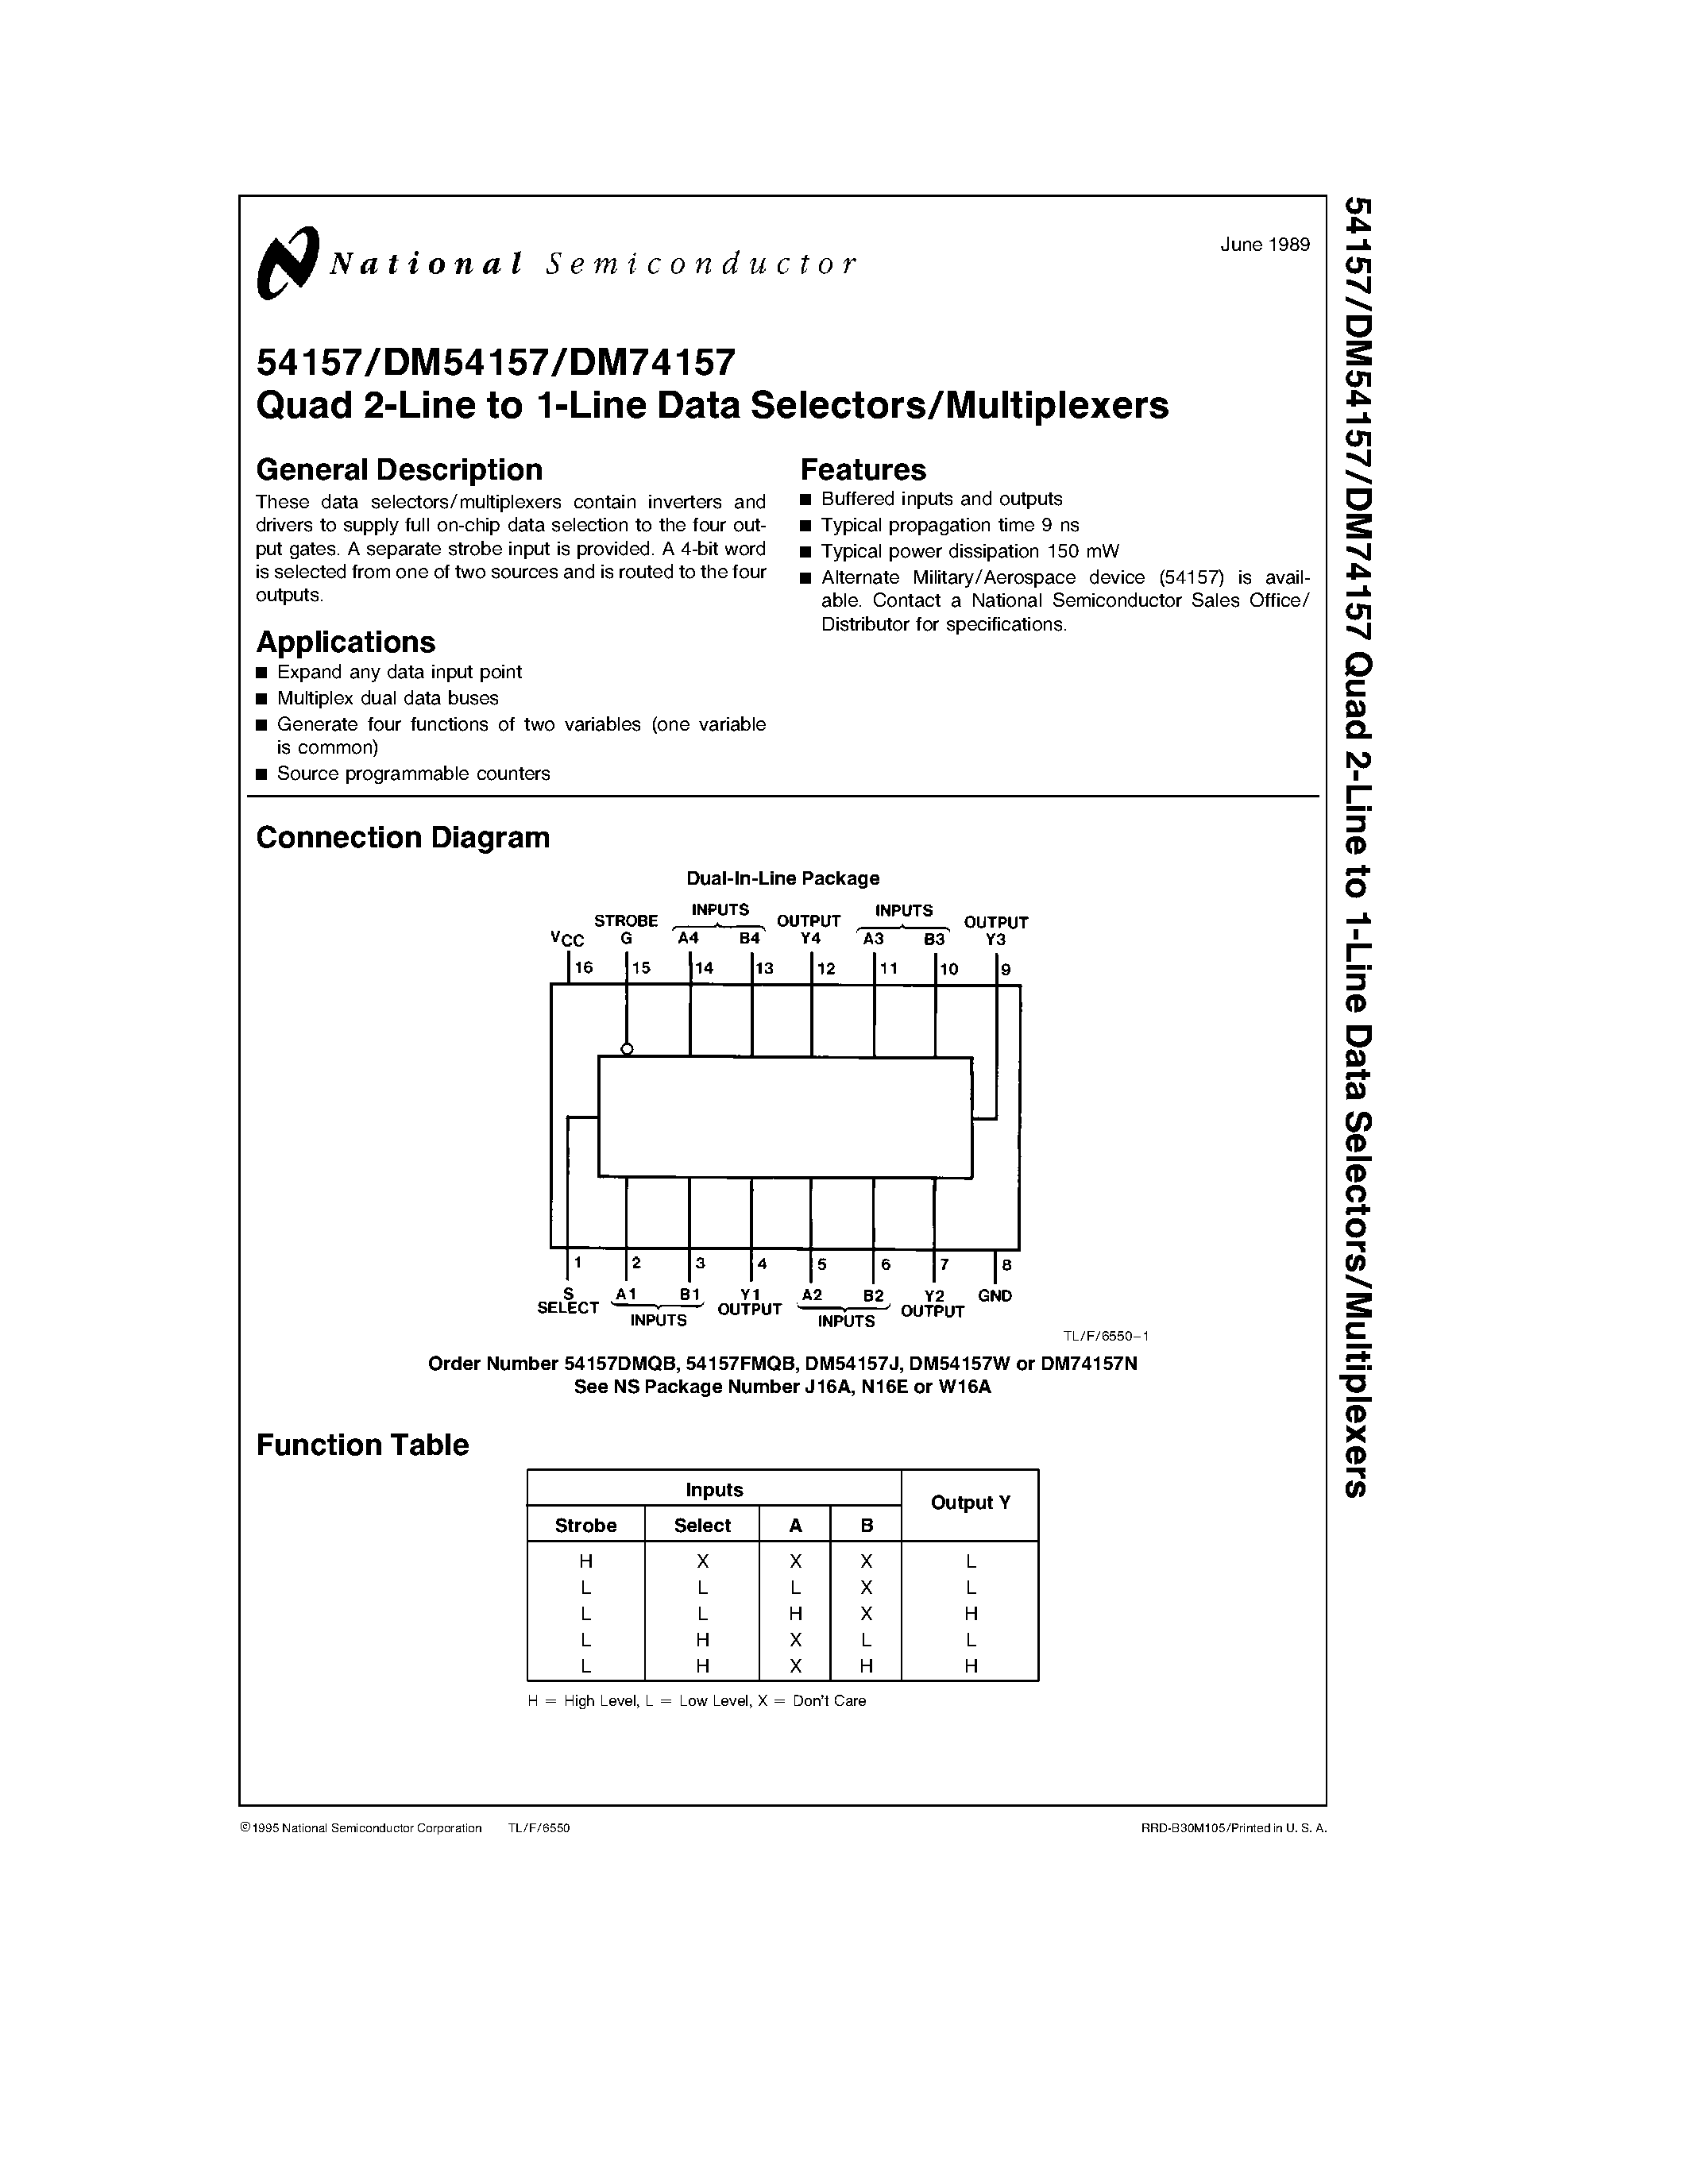 Datasheet 54157FMQB - Quad 2-Line to 1-Line Data Selectors/Multiplexers page 1